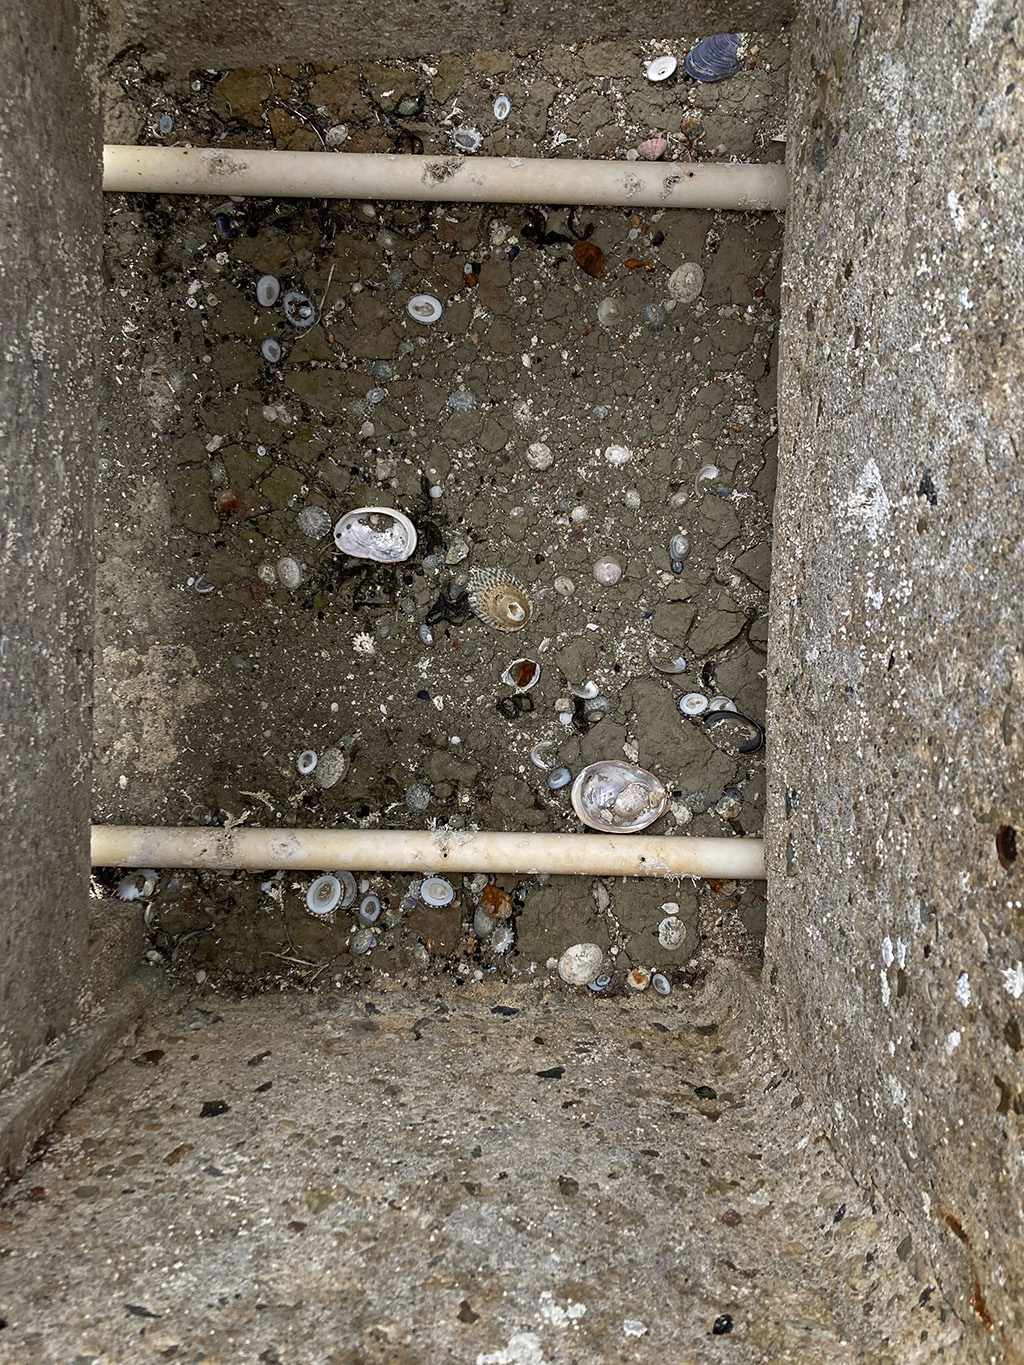 A rectangular concrete pit littered with empty shells and two parallel pipes.